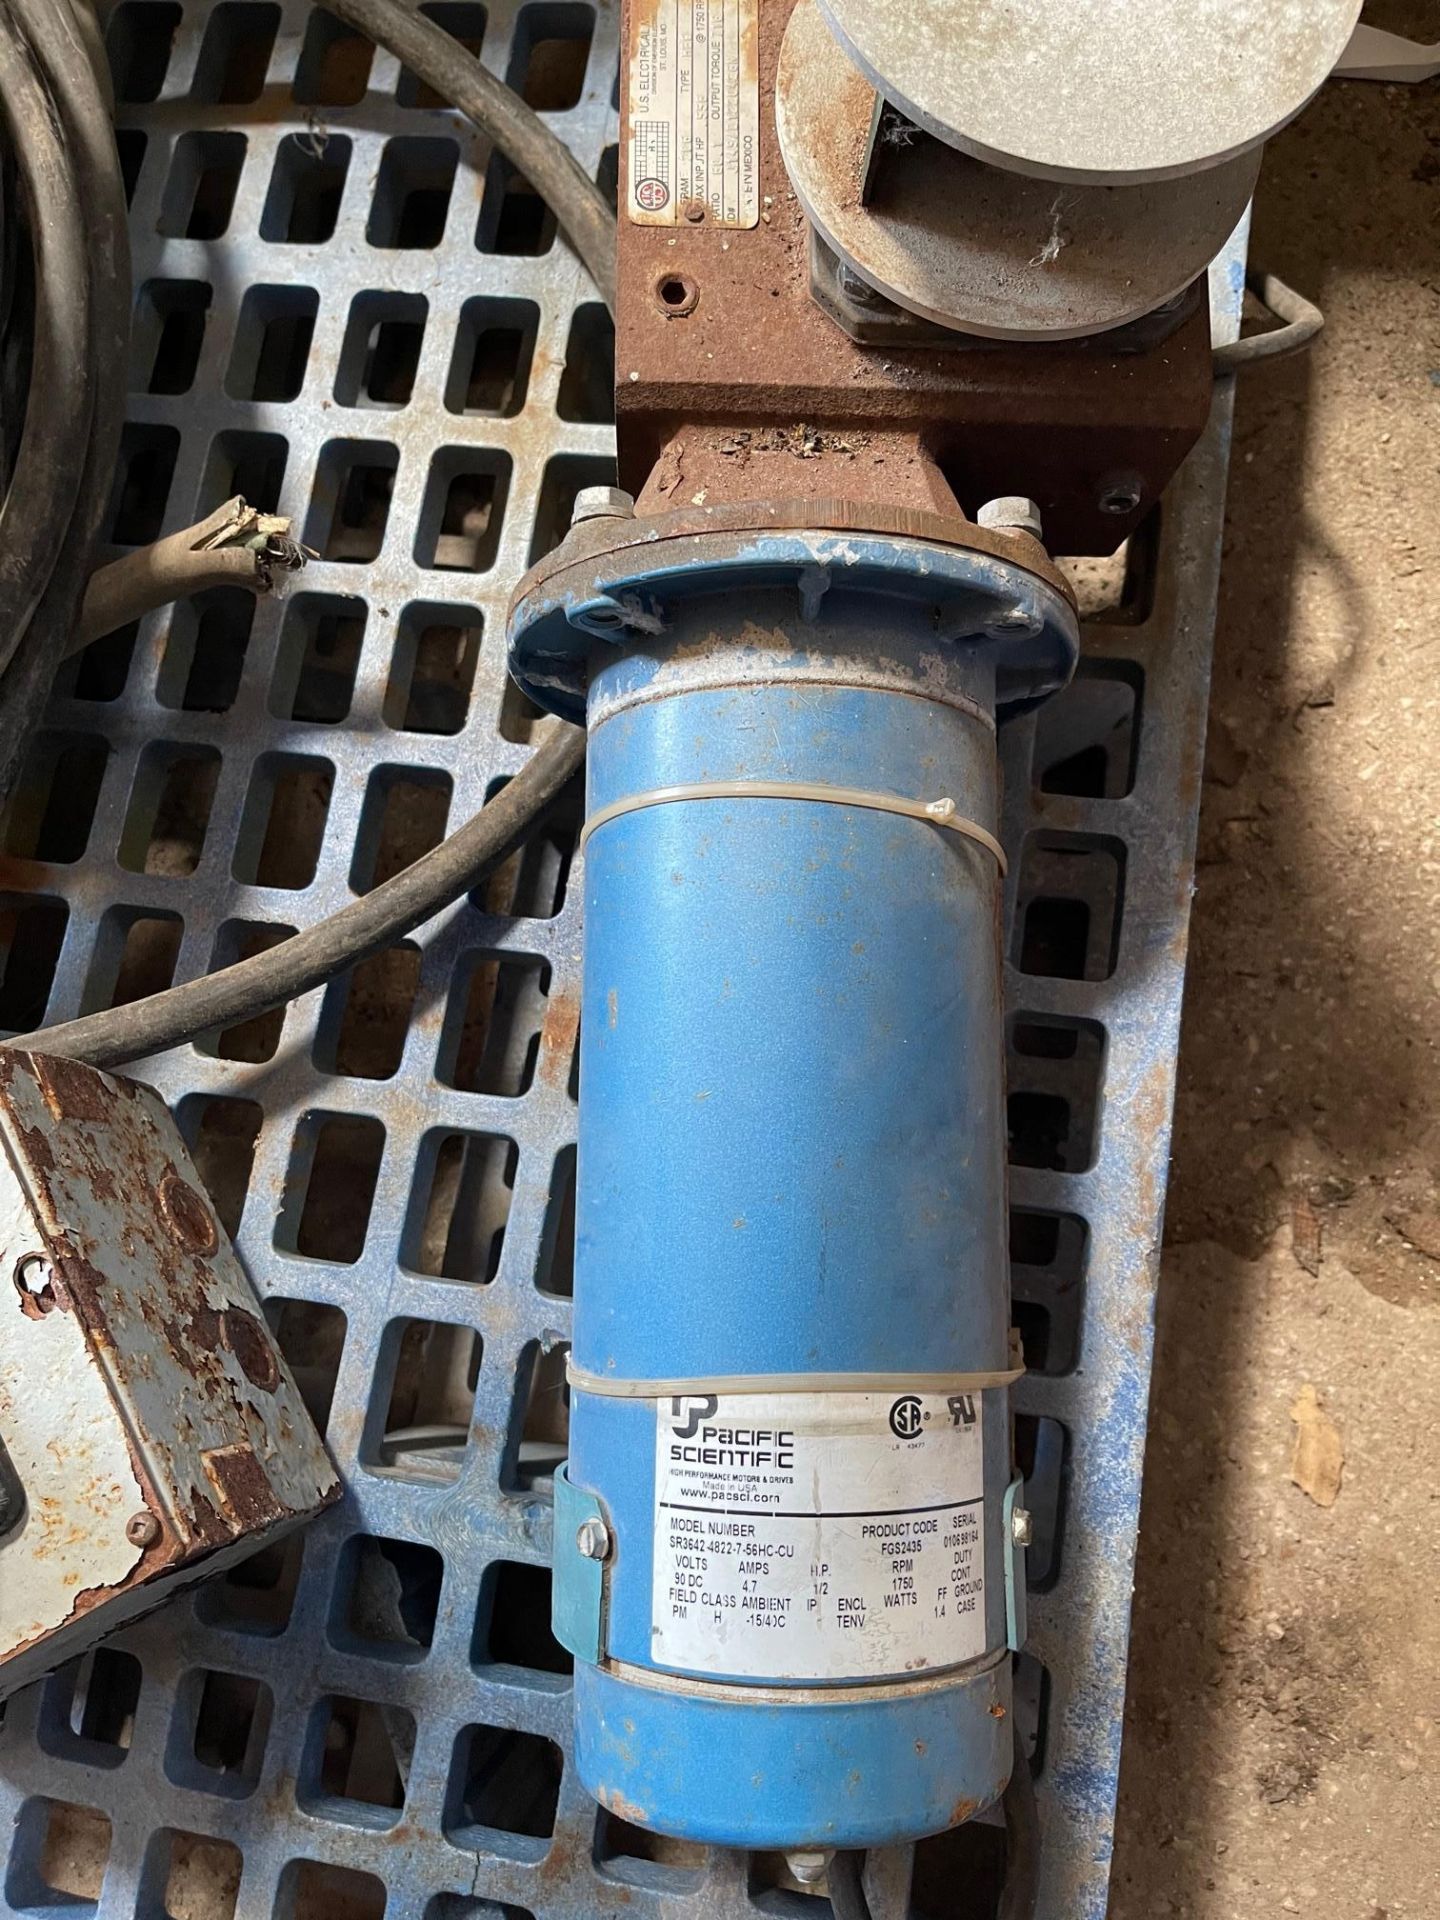 LOT OF WIRES, PLUGS, SUBMERSIBLE PUMP FLOATS TIMES FOUR, DC MOTOR AND GEARBOX 60:1 RATIO - Image 2 of 5